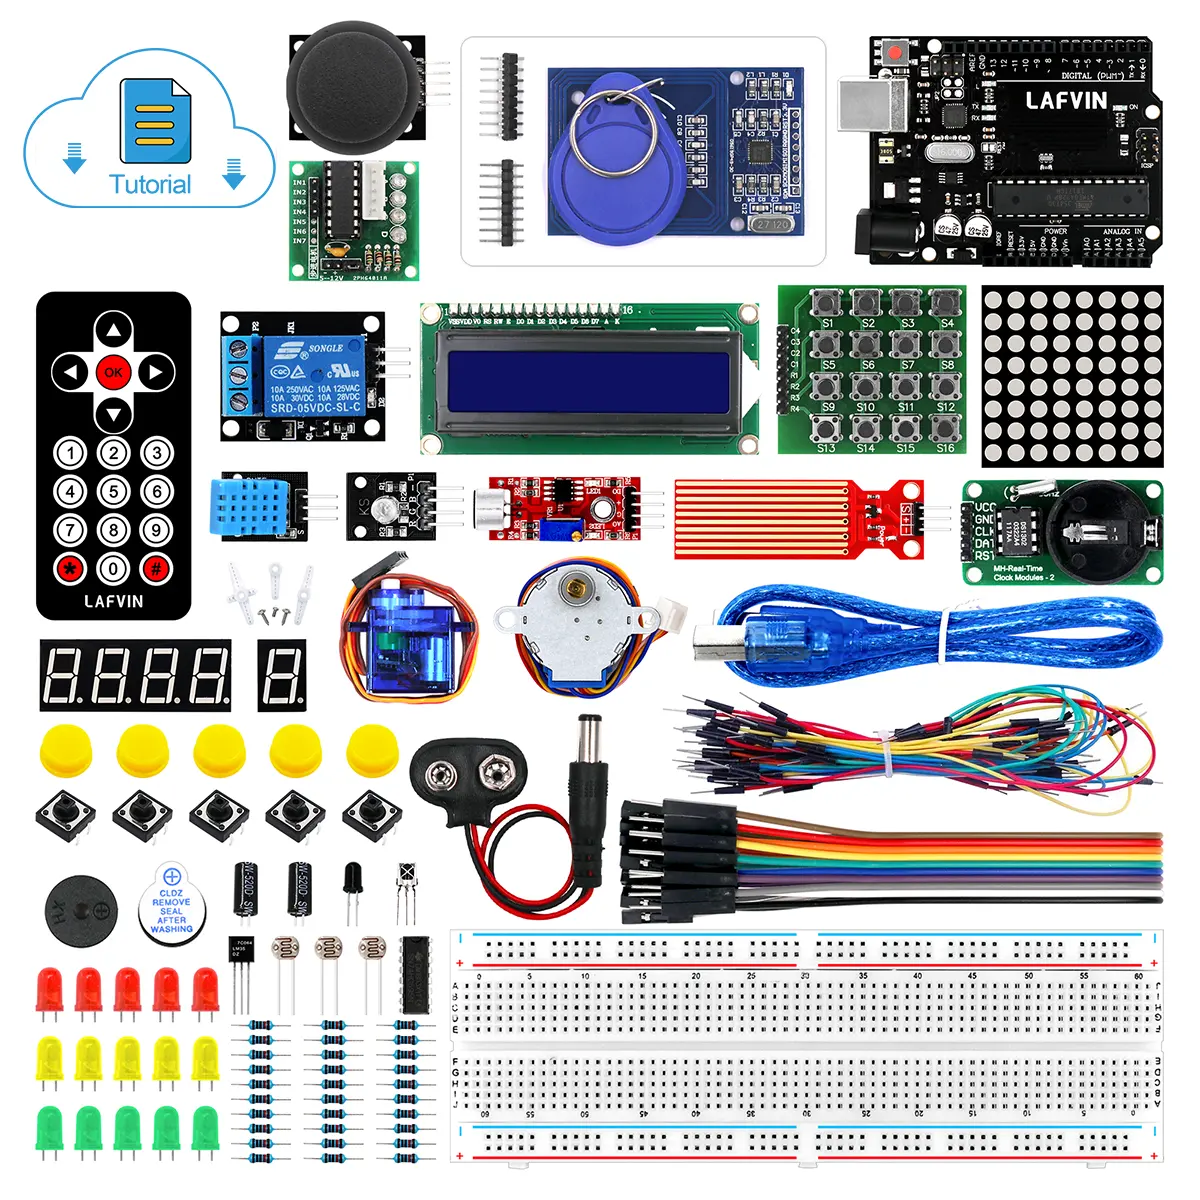 LAFVIN RFID Learning Suit Basic Starter Kit LCD1602 IIC for R3 Learning Kit for Arduino with Tutorial